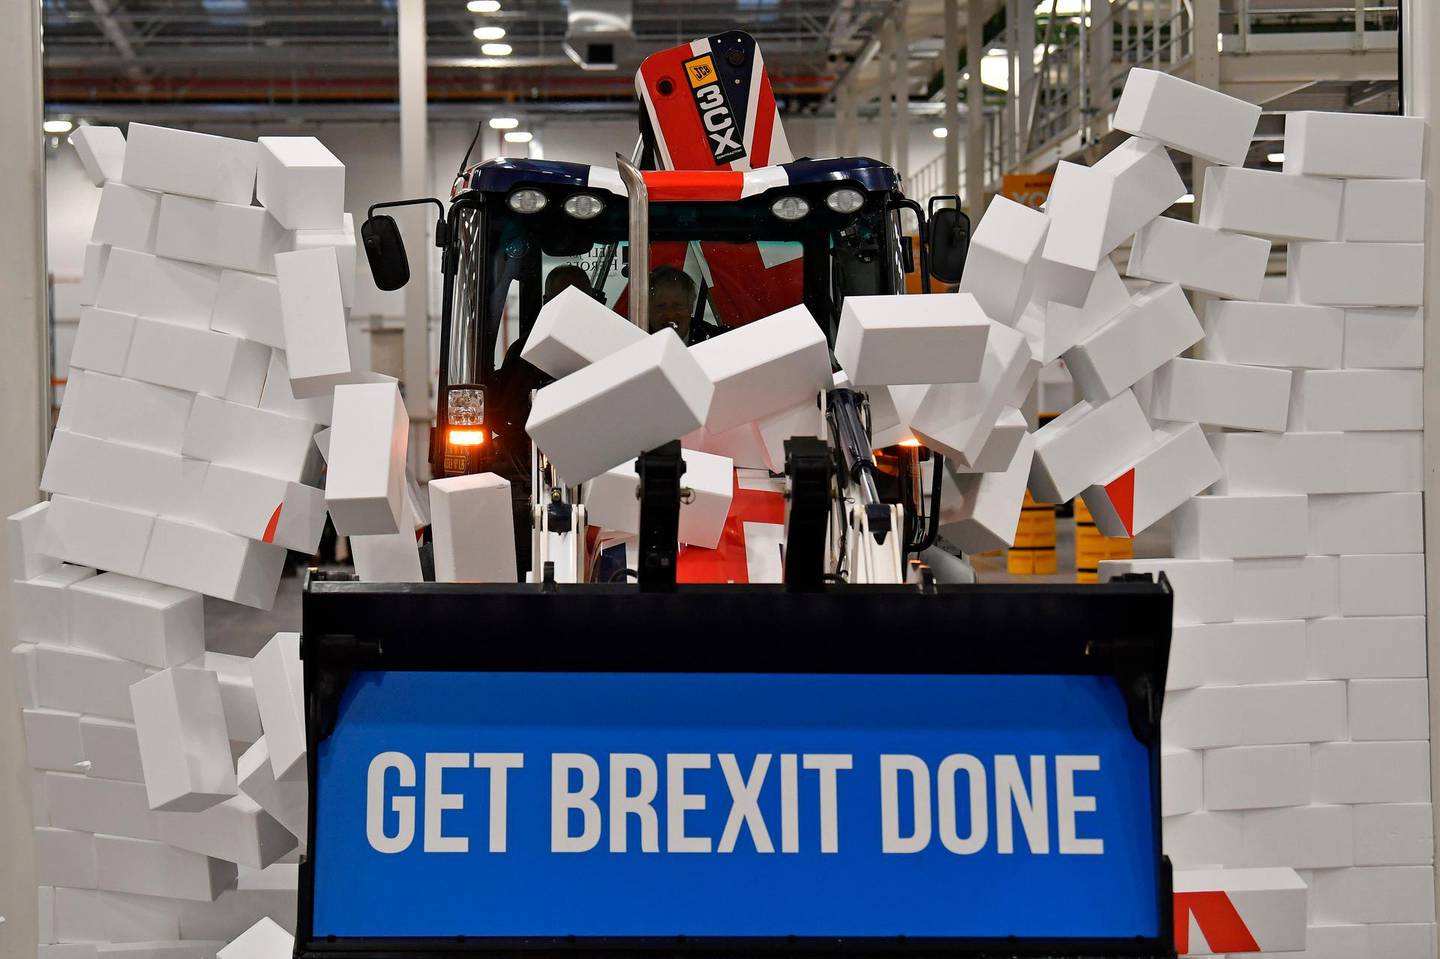 FILE - In this Tuesday Dec. 10, 2019 file photo, Britain's Prime Minister Boris Johnson drives a JCB through a symbolic wall with the Conservative Party slogan 'Get Brexit Done' in the digger bucket, during an election campaign event at the JCB manufacturing facility in Uttoxeter, England. Johnson's Conservatives won an overwhelming majority in the election two days later and Britain is now scheduled to leave the European Union on Jan. 31, 2020. (Ben Stansall/Pool via AP)